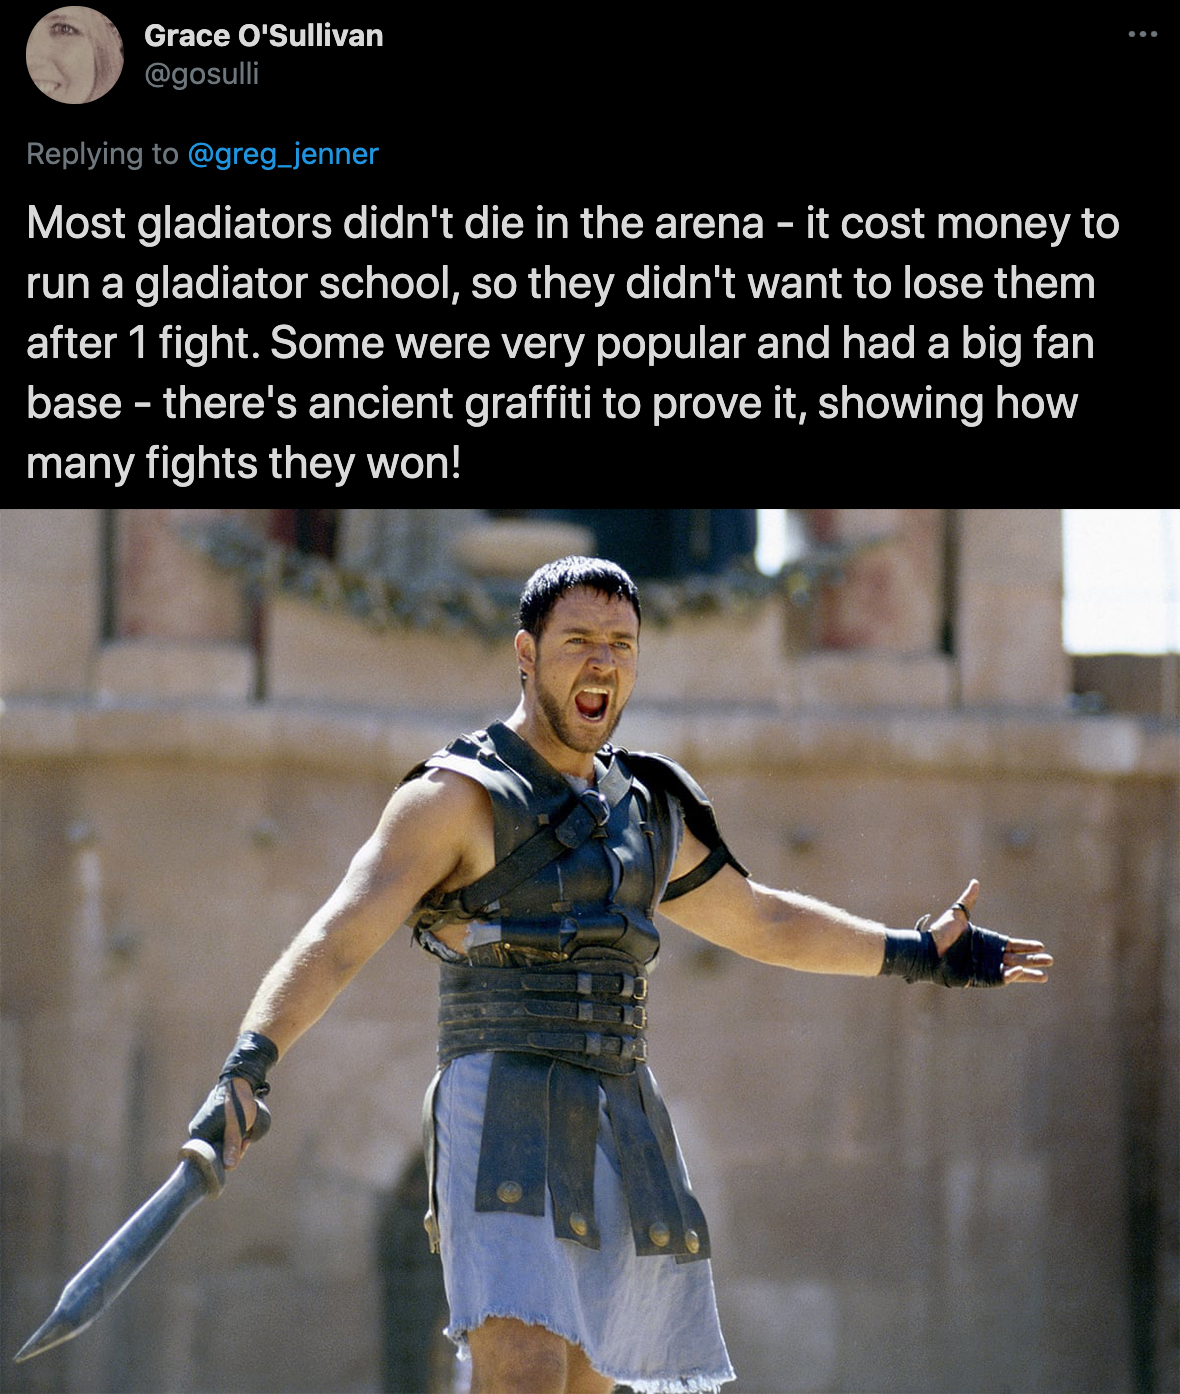 cool facts - Most gladiators didn't die in the arena it cost money to run a gladiator school, so they didn't want to lose them after 1 fight. Some were very popular and had a big fan base there's ancient graffiti to prove it